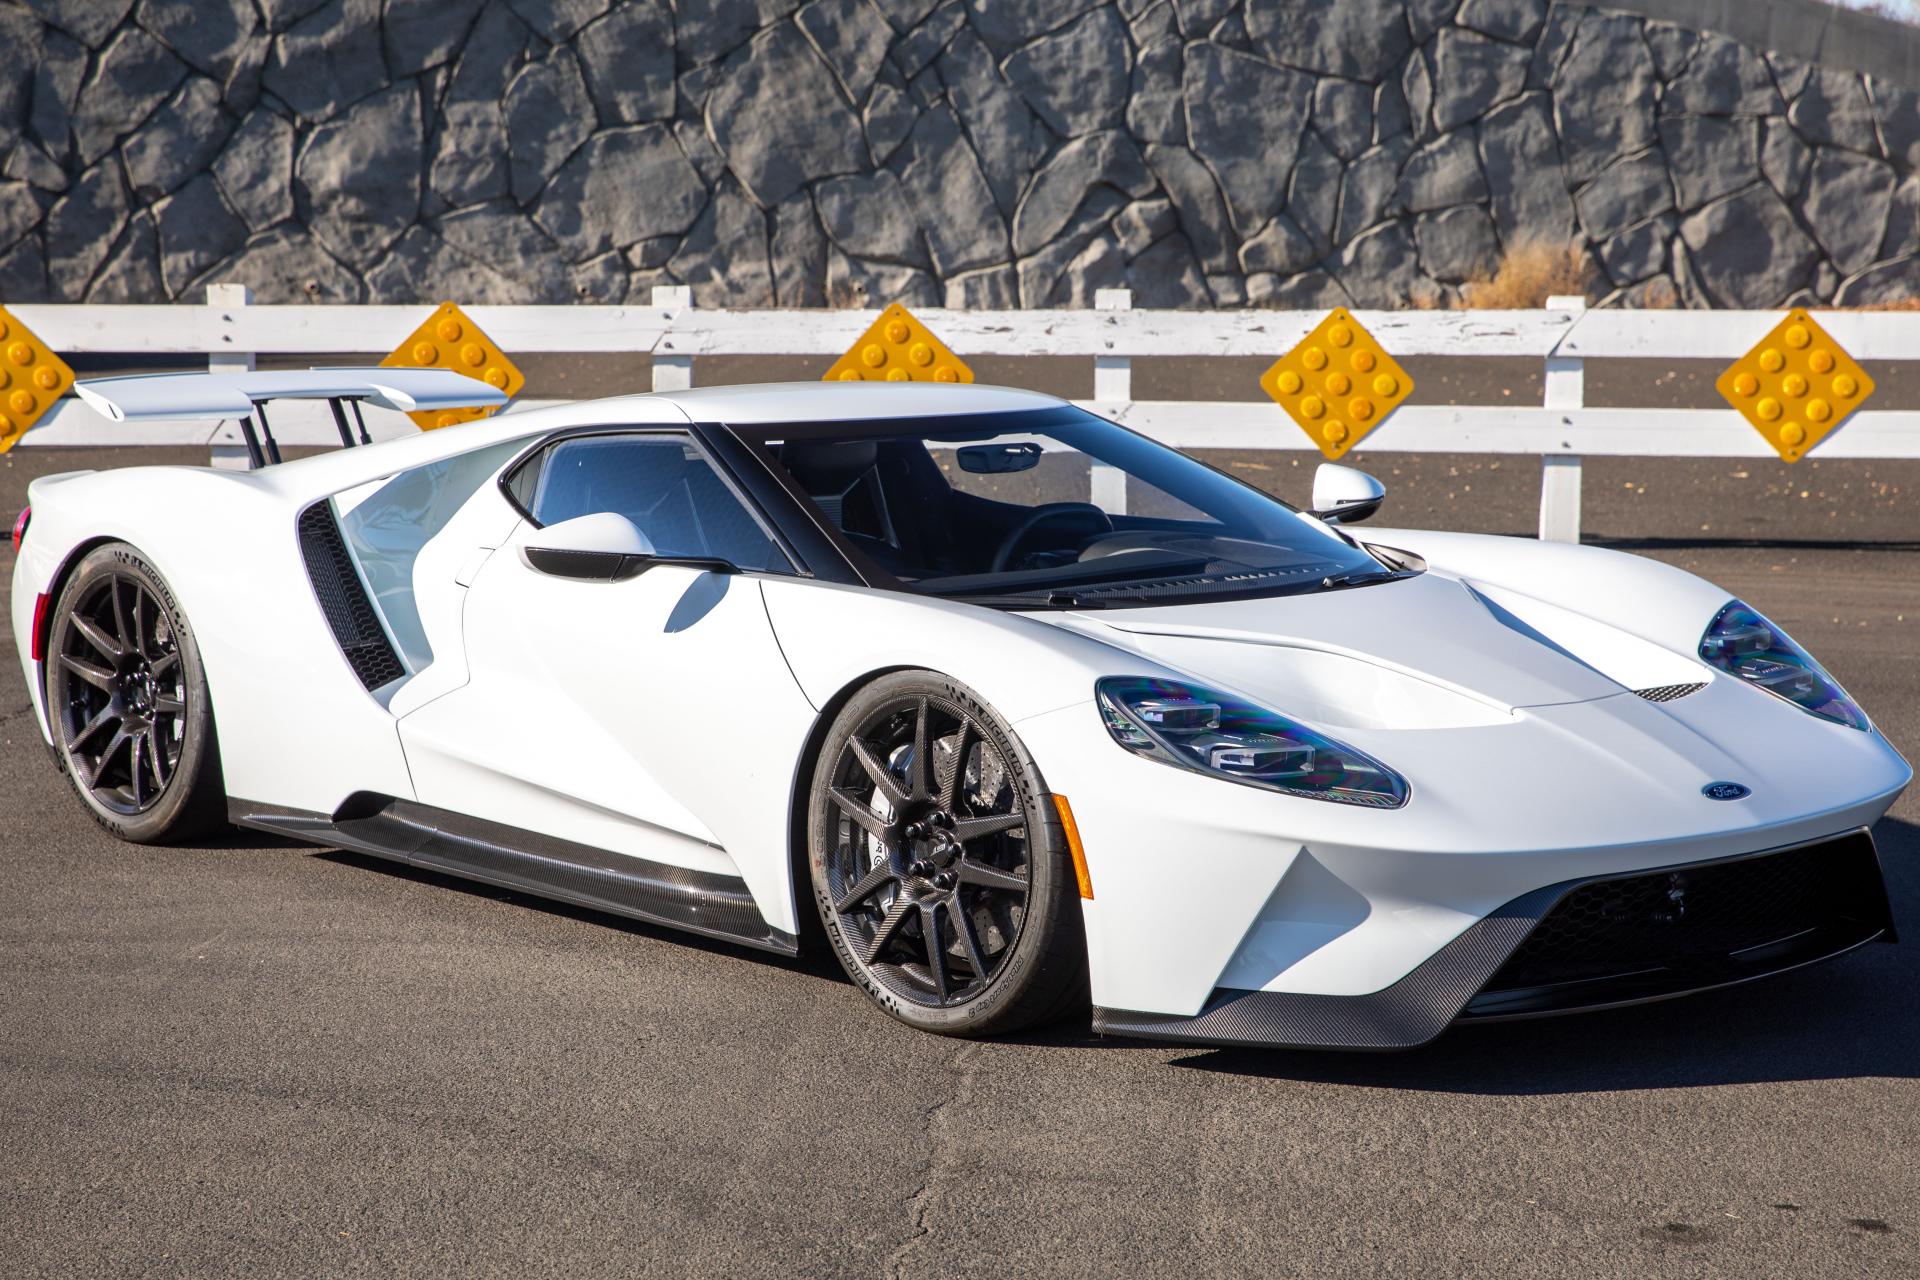 The Guy Martin review: 2017 Ford GT